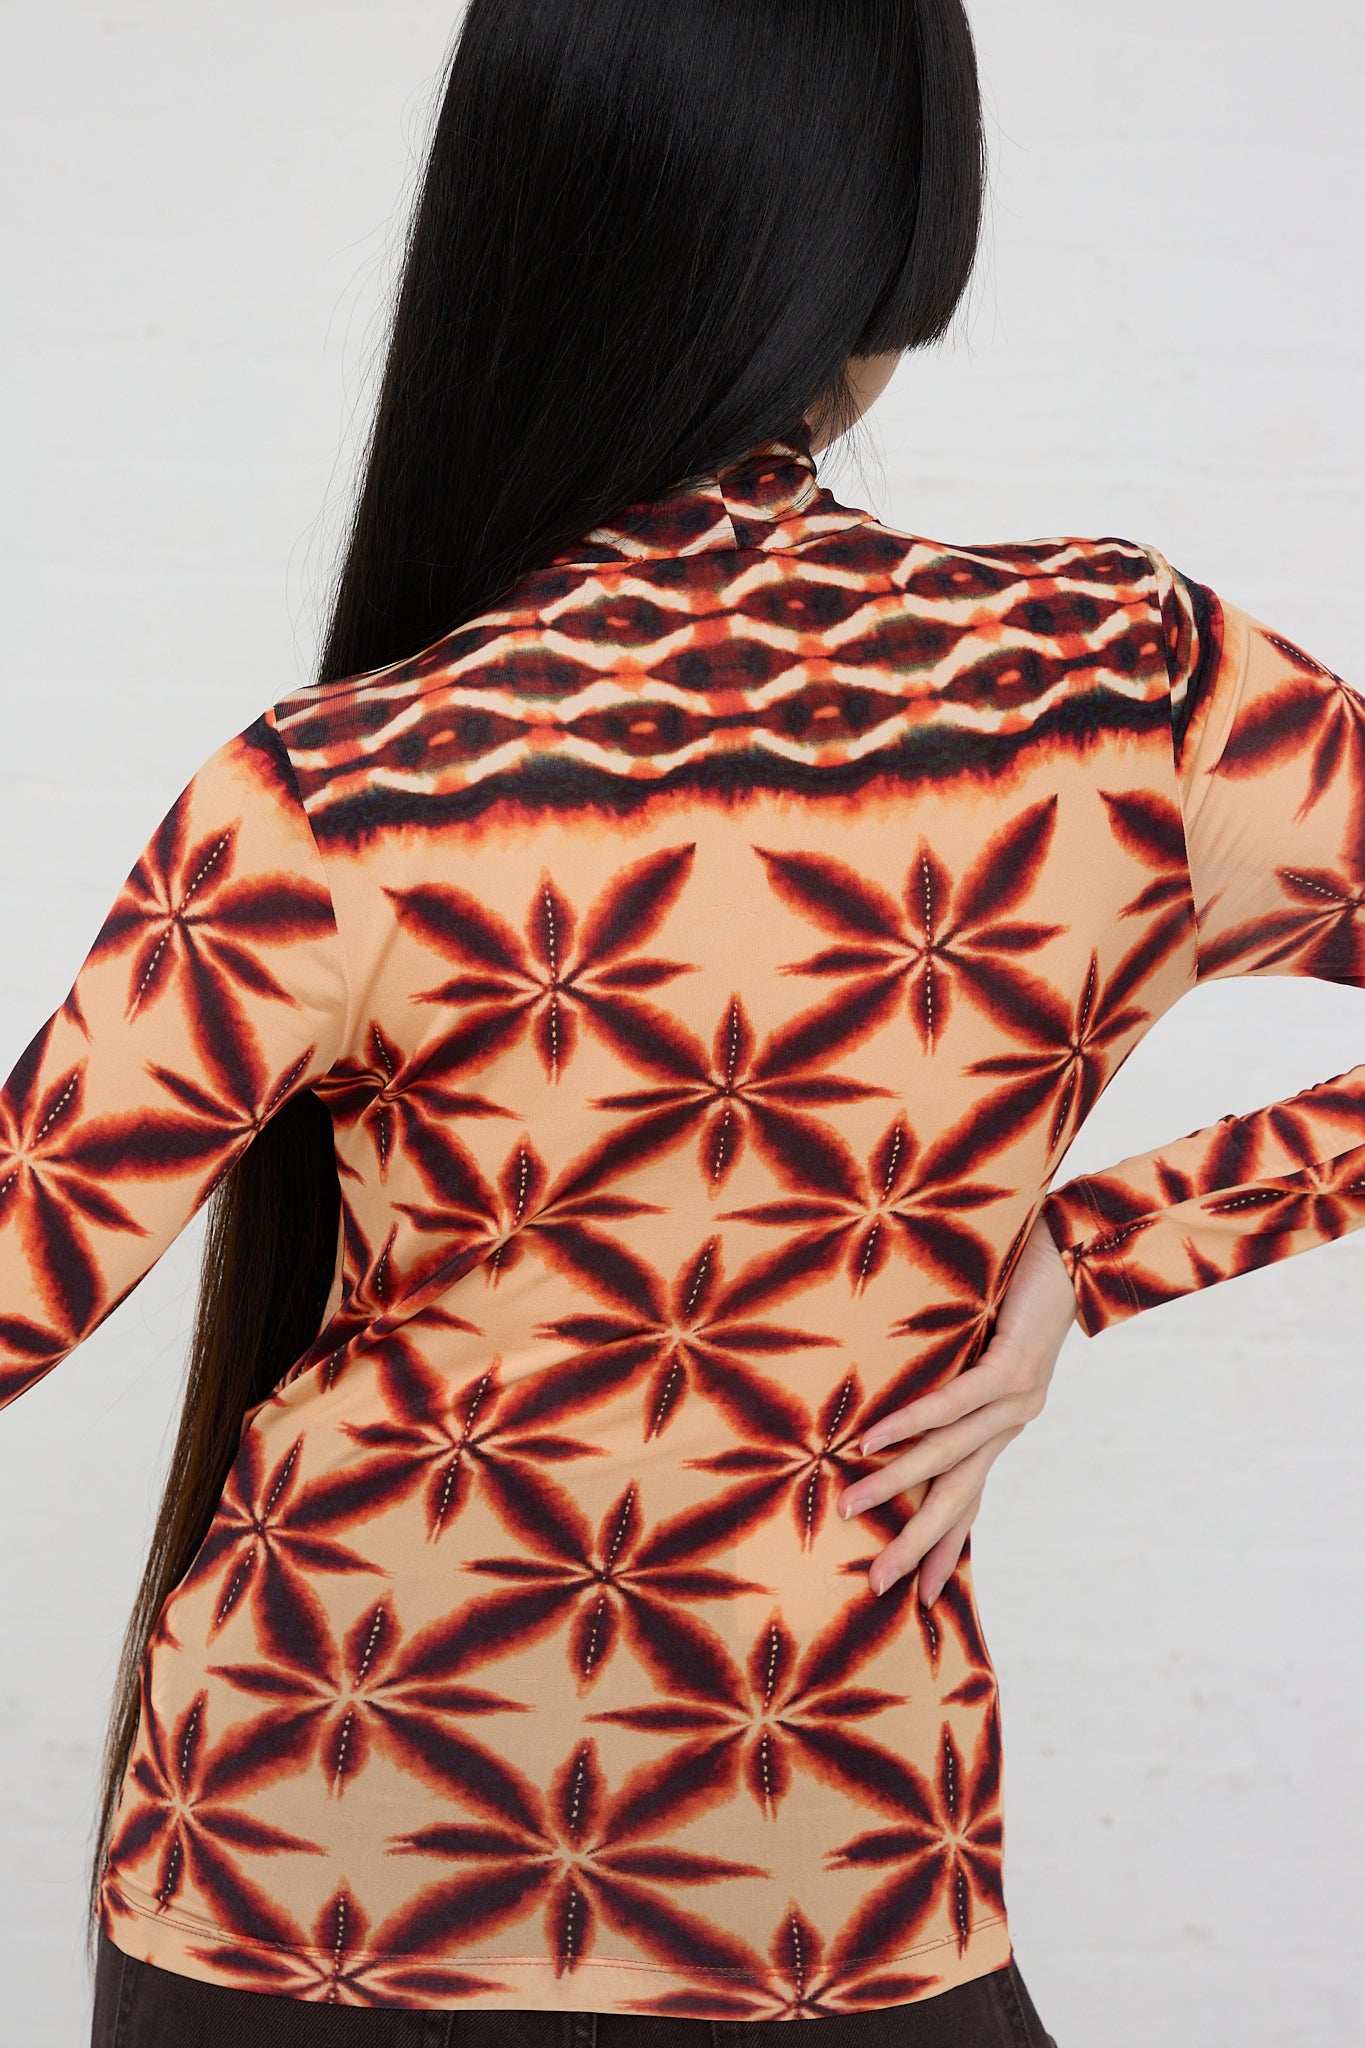 A woman wearing an Ulla Johnson Aurelia Turtleneck in Andromeda with a printed pattern. Back view.